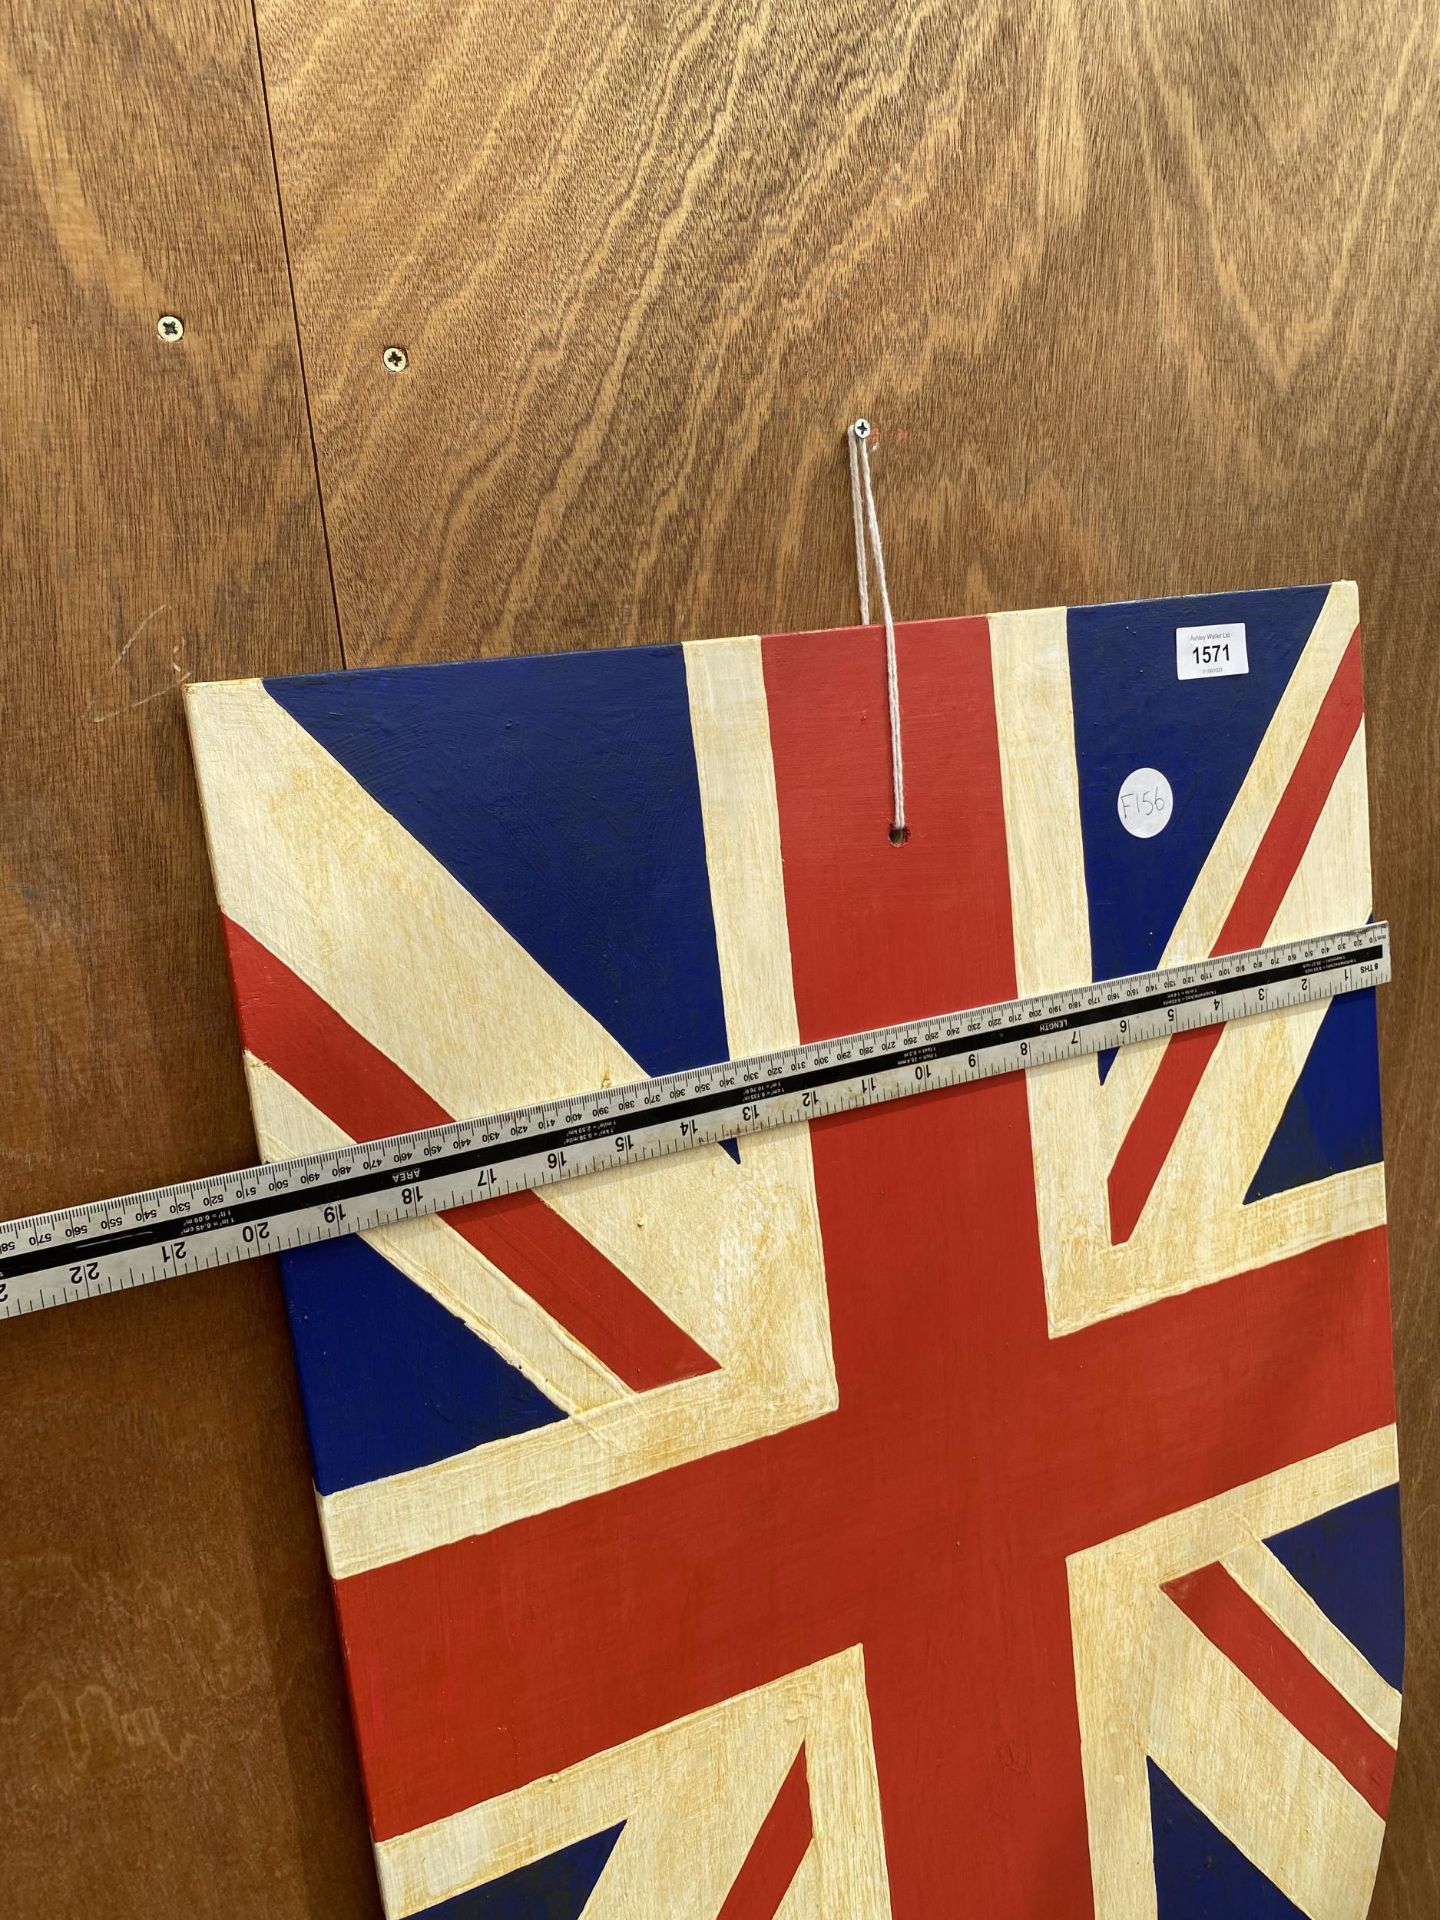 A WOODEN HAND PAINTED UNION JACK SIGN - Image 3 of 3